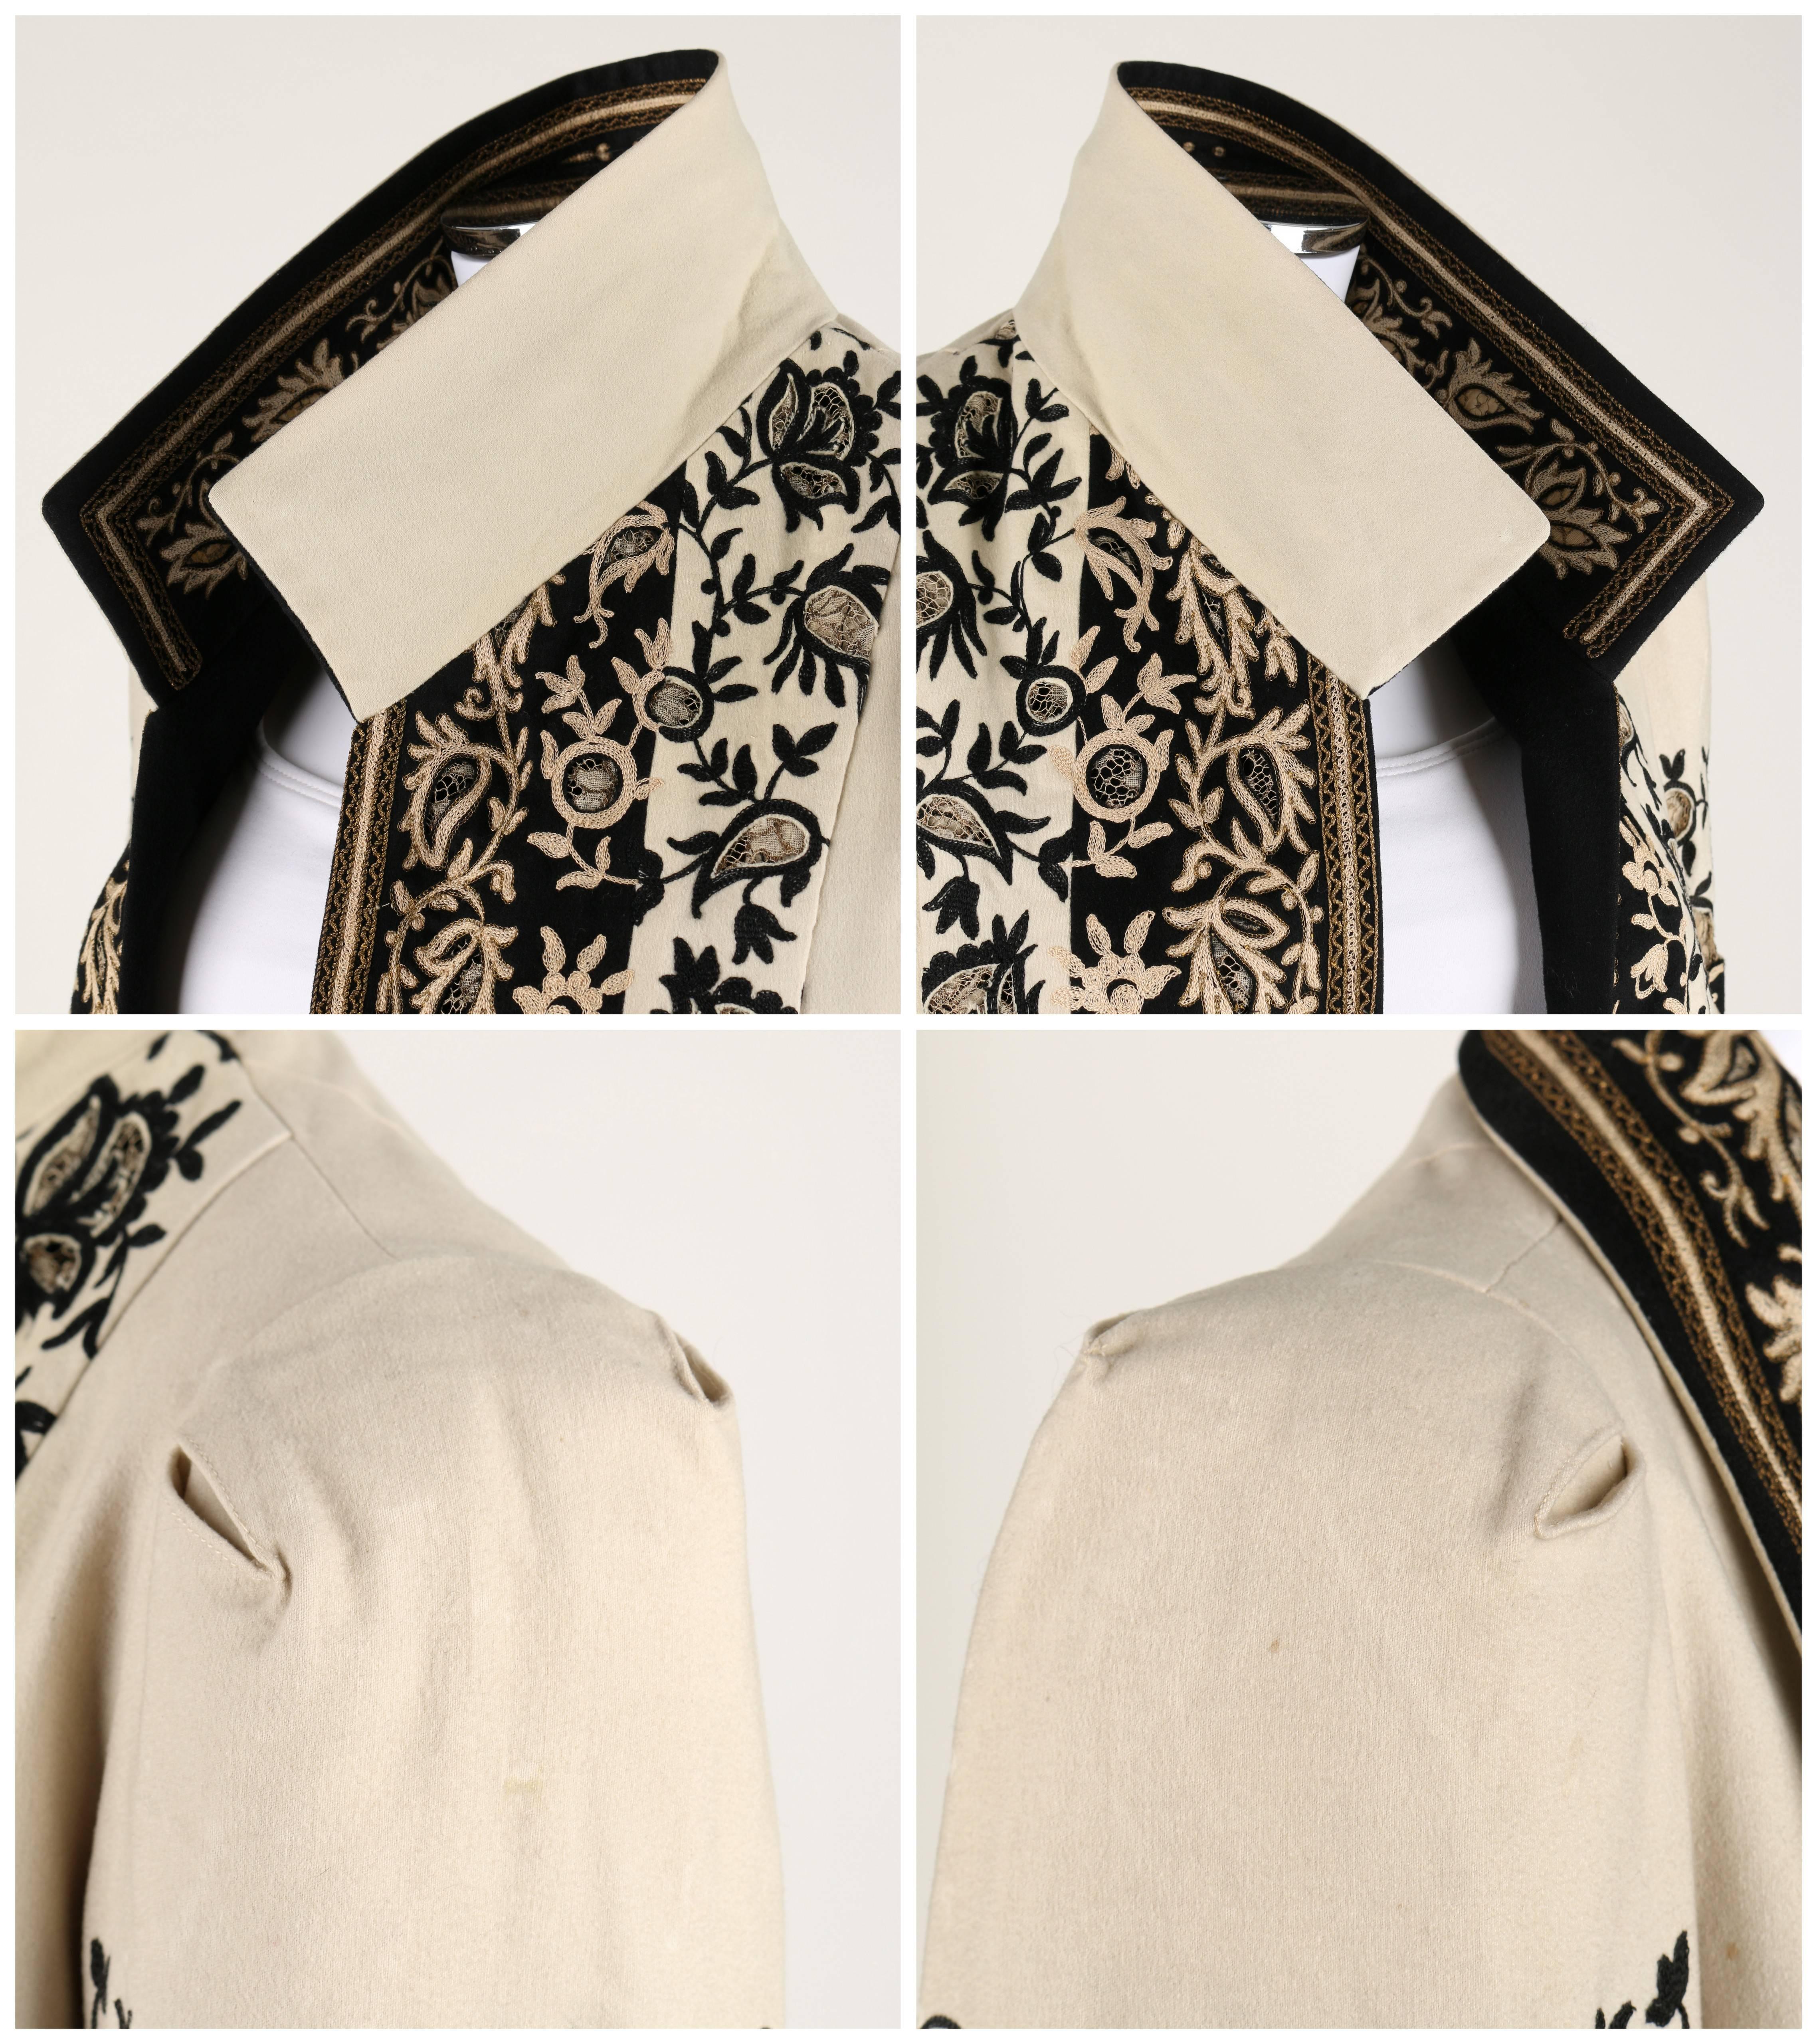 Women's COUTURE c.1910's Edwardian Museum Piece Embroidered Cutwork Lace Jacket Coat